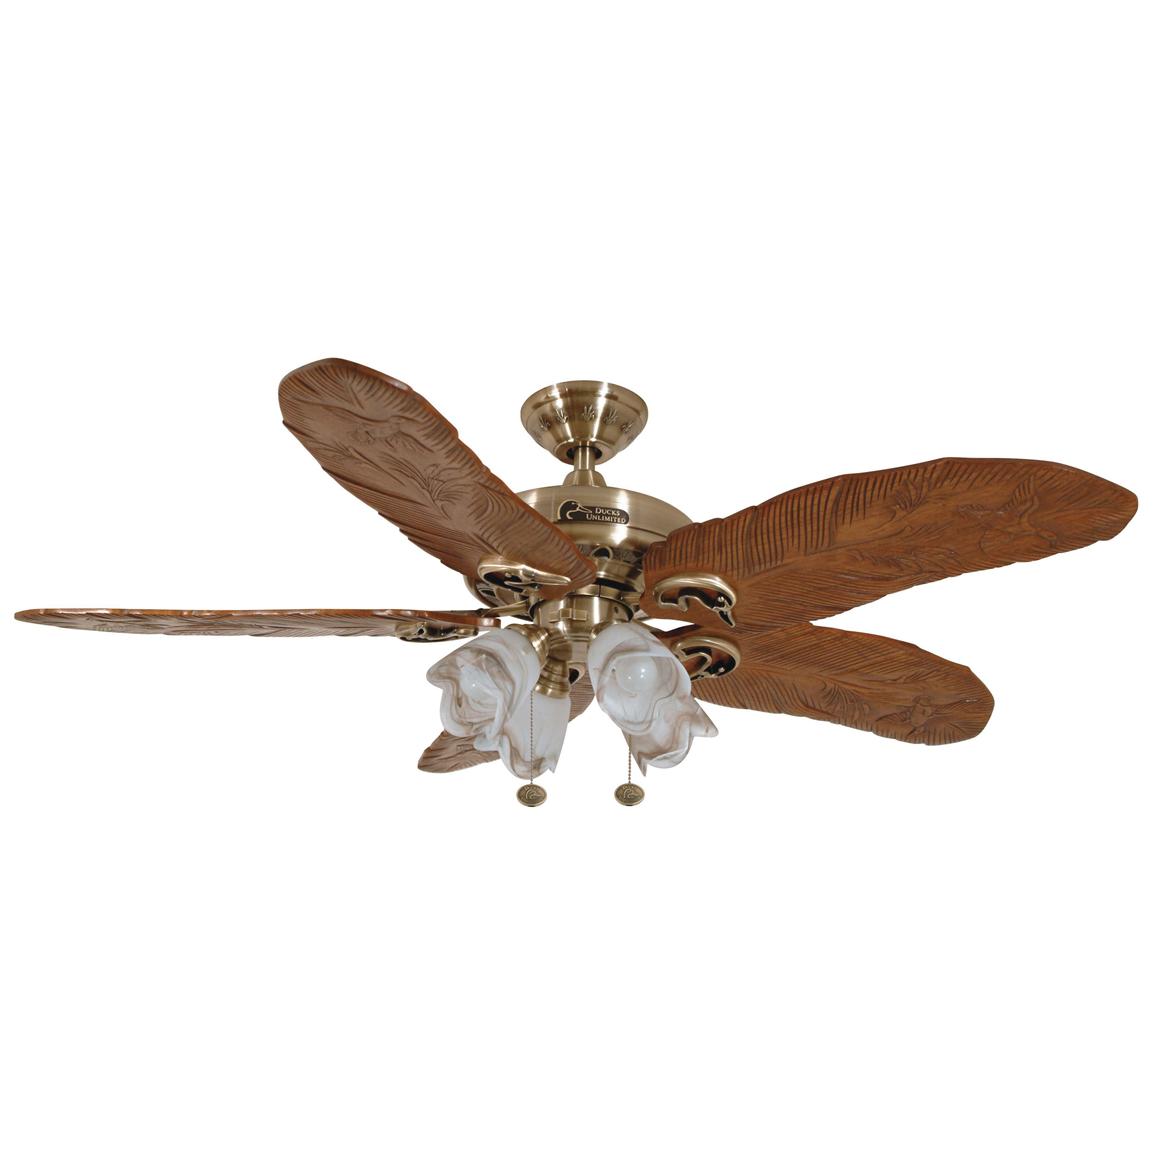 John Marshall Ducks UnlimitedÂ® Ceiling Fan with Hand-Carved Feather Blade and Light Kit - 109420 